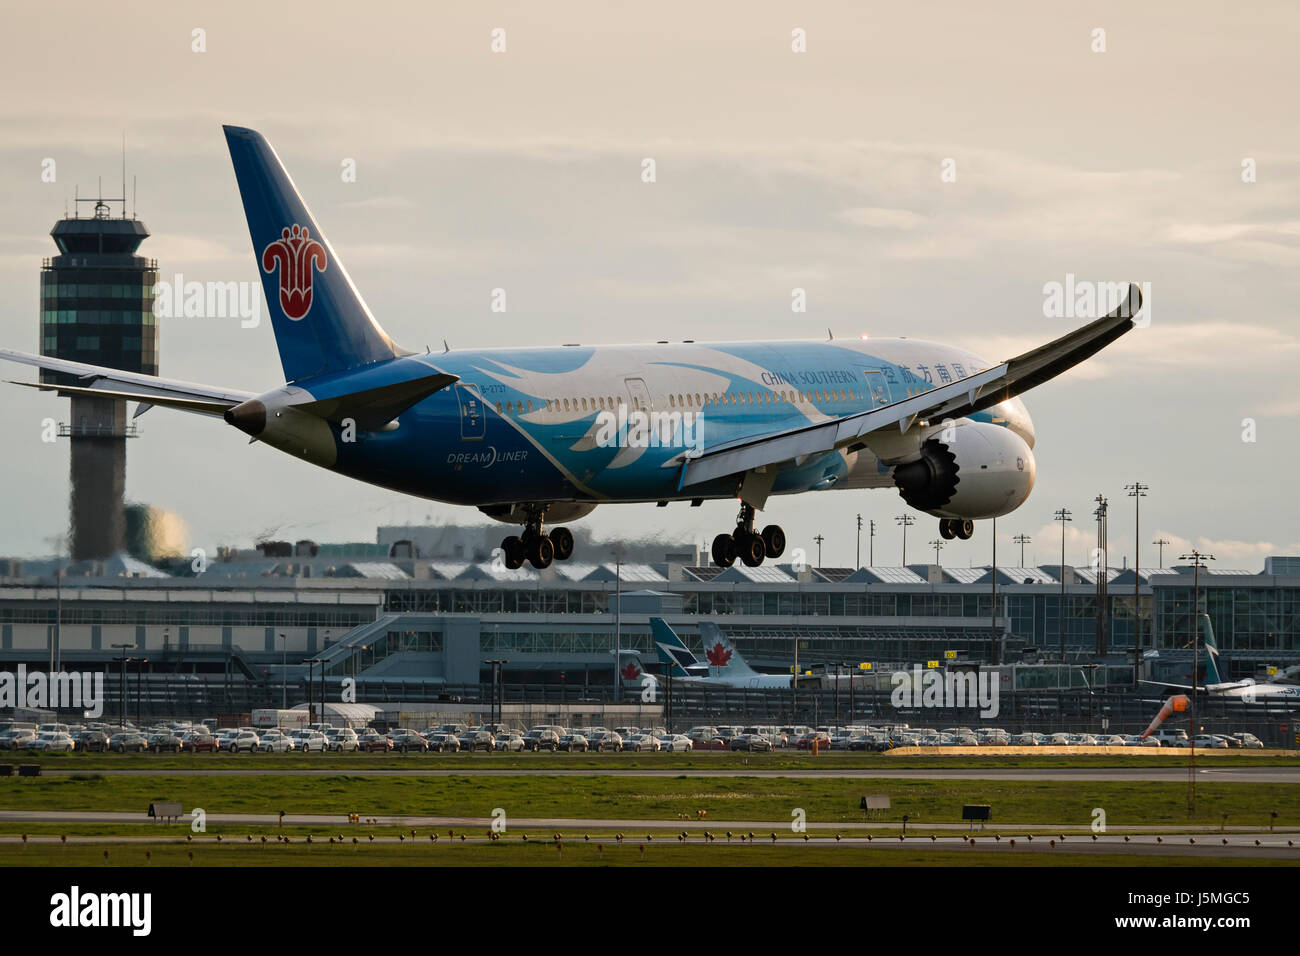 China Southern Airlines plane airplane aeroplane landing Vancouver International Airport terminal exterior view Boeing 787 Dreamliner Stock Photo